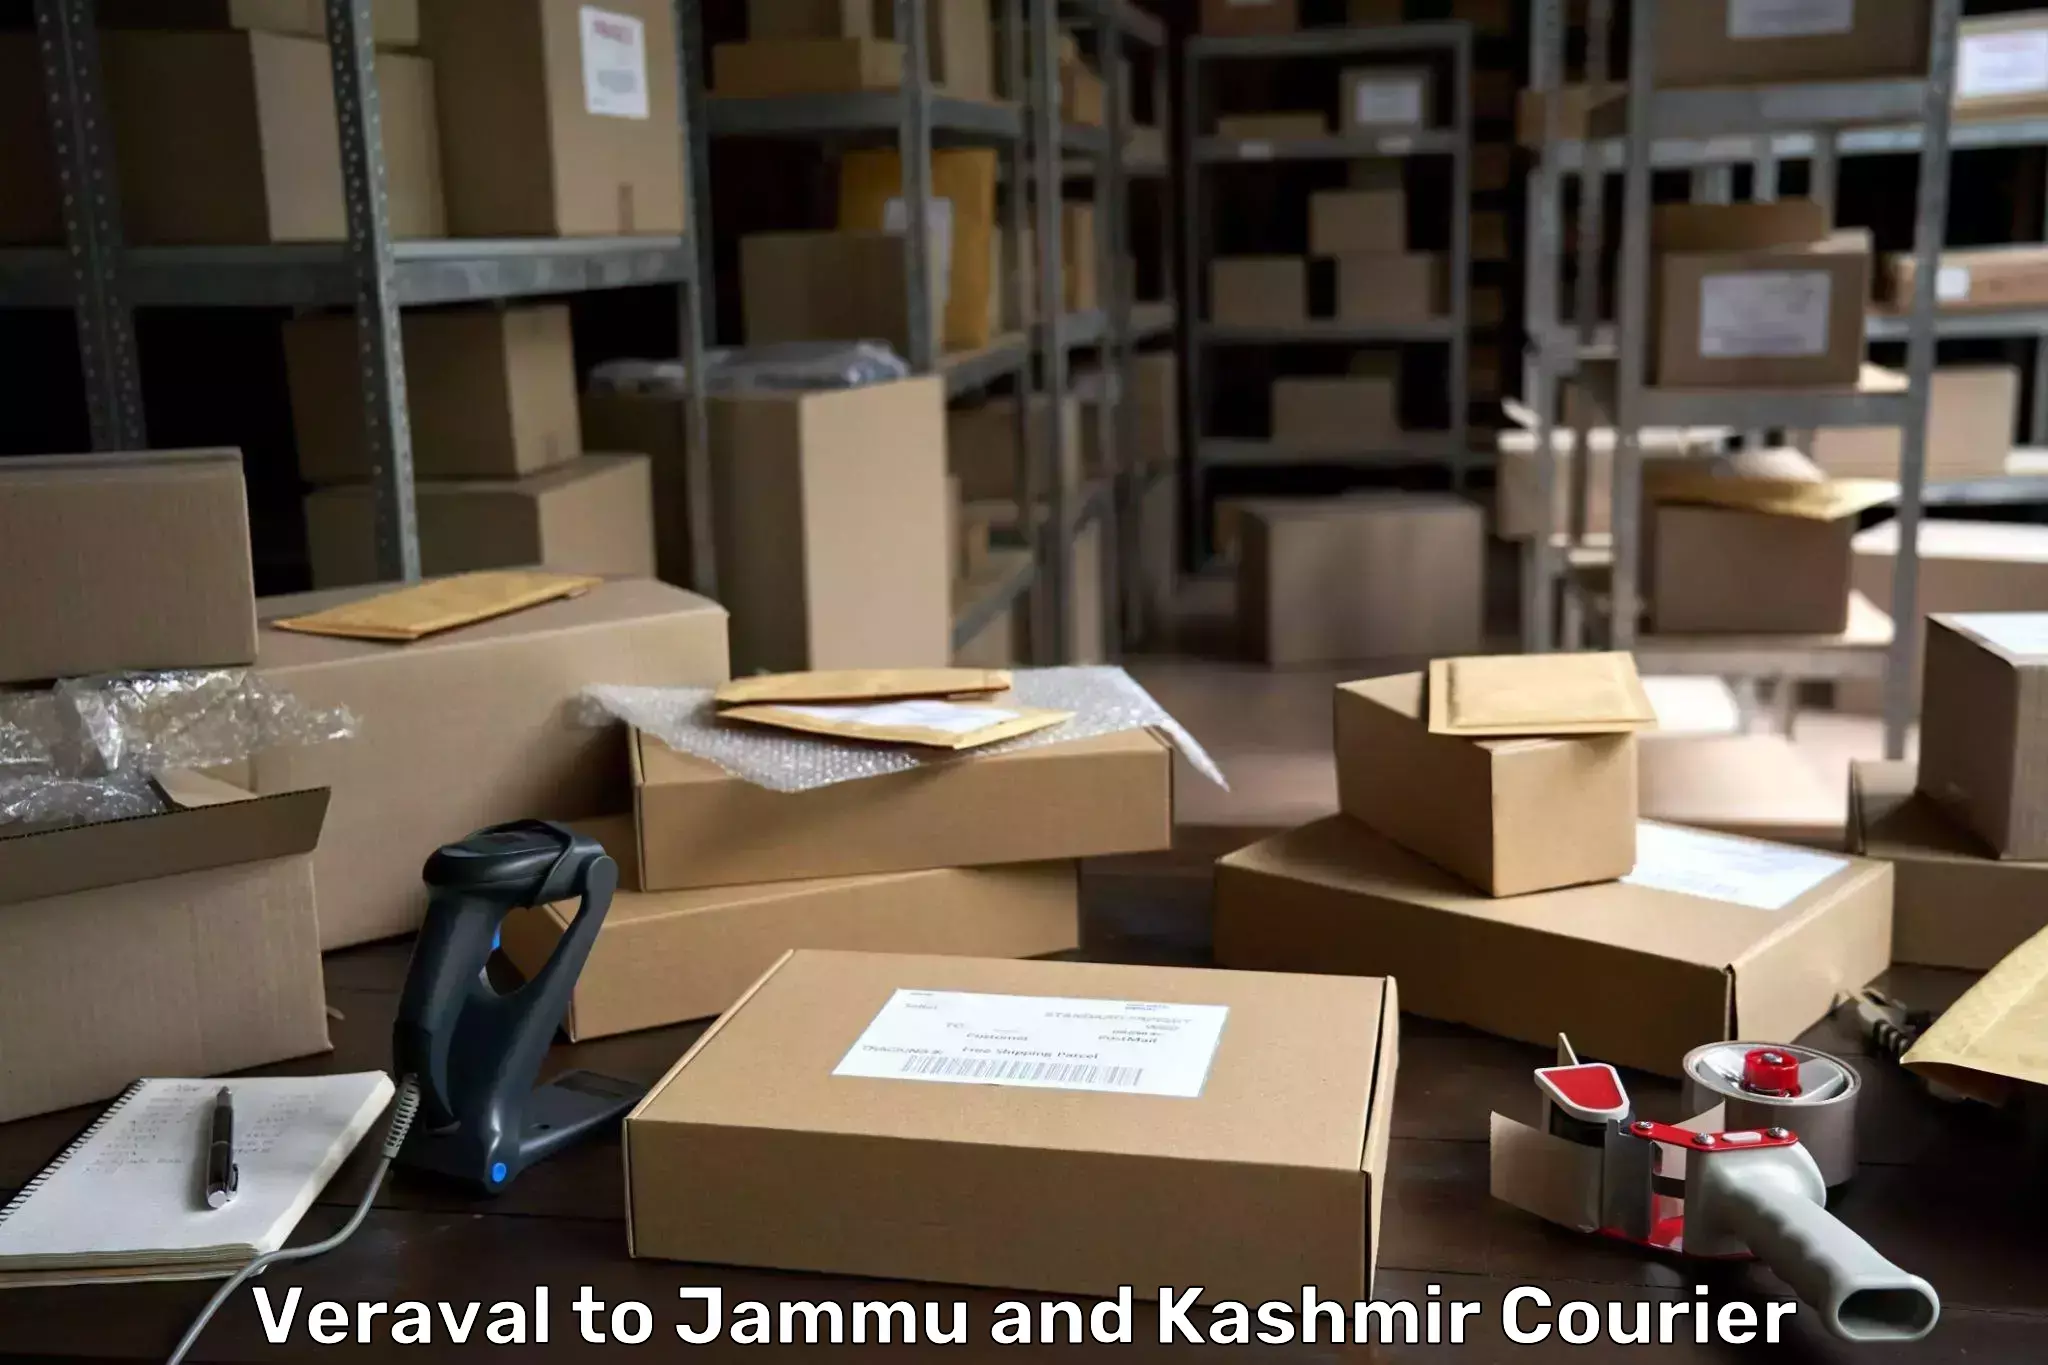 Sustainable shipping practices Veraval to Jammu and Kashmir